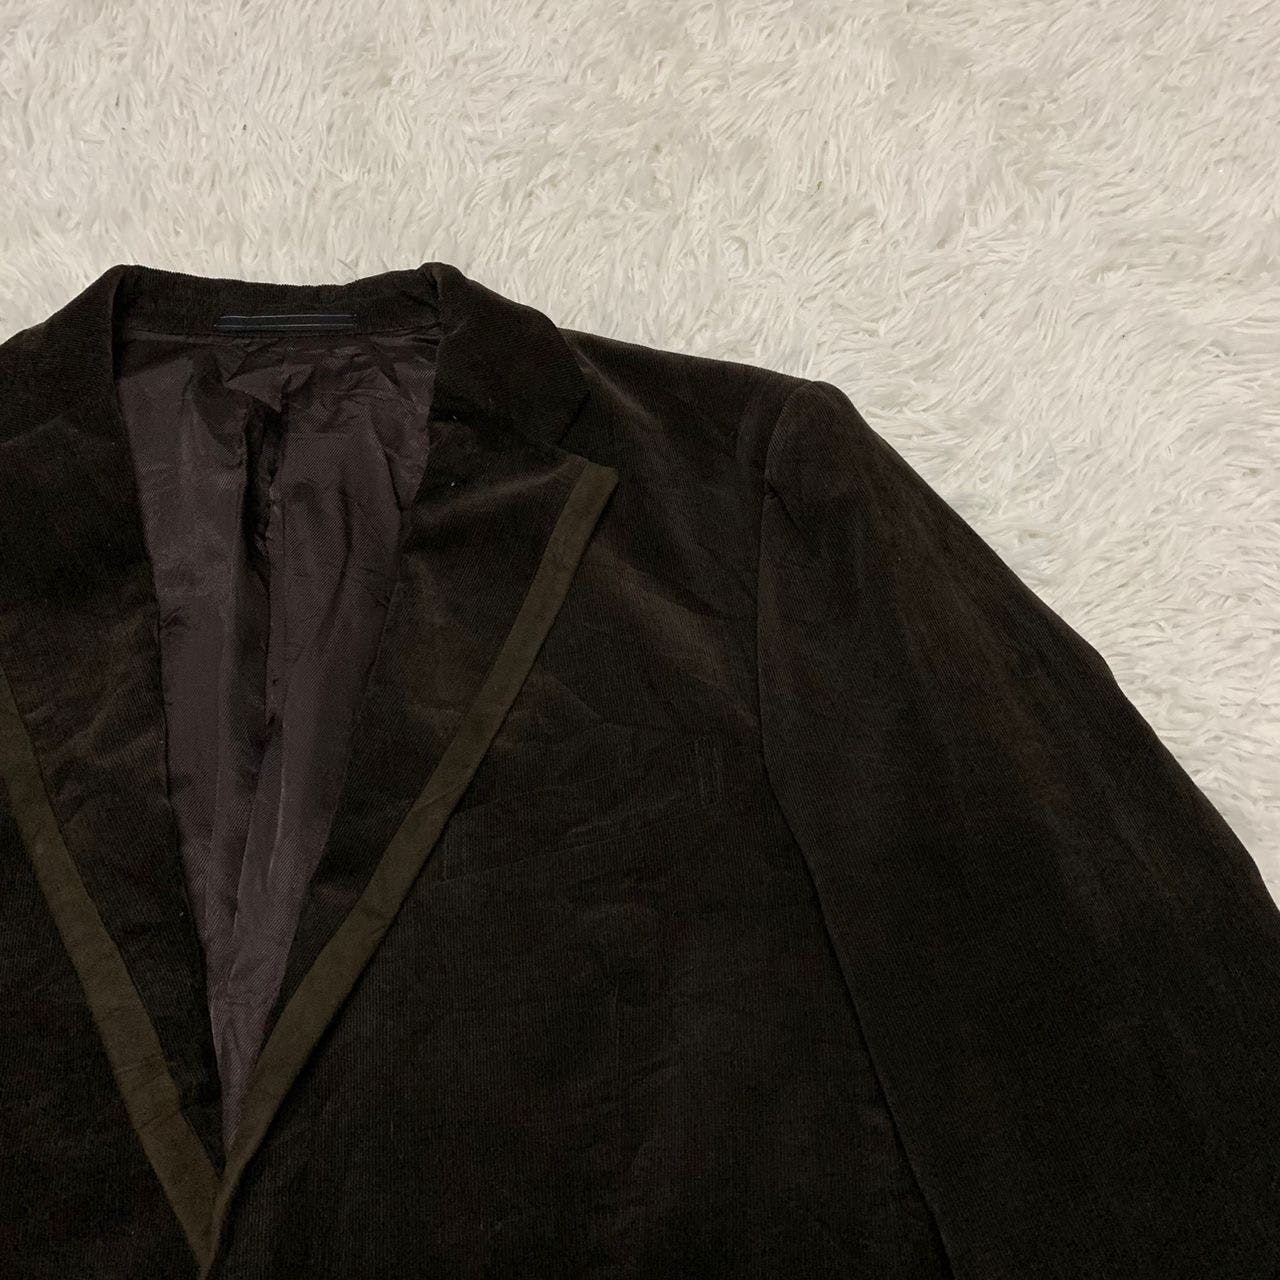 EZ by Zegna Jacket Coat Made in Japan - 4